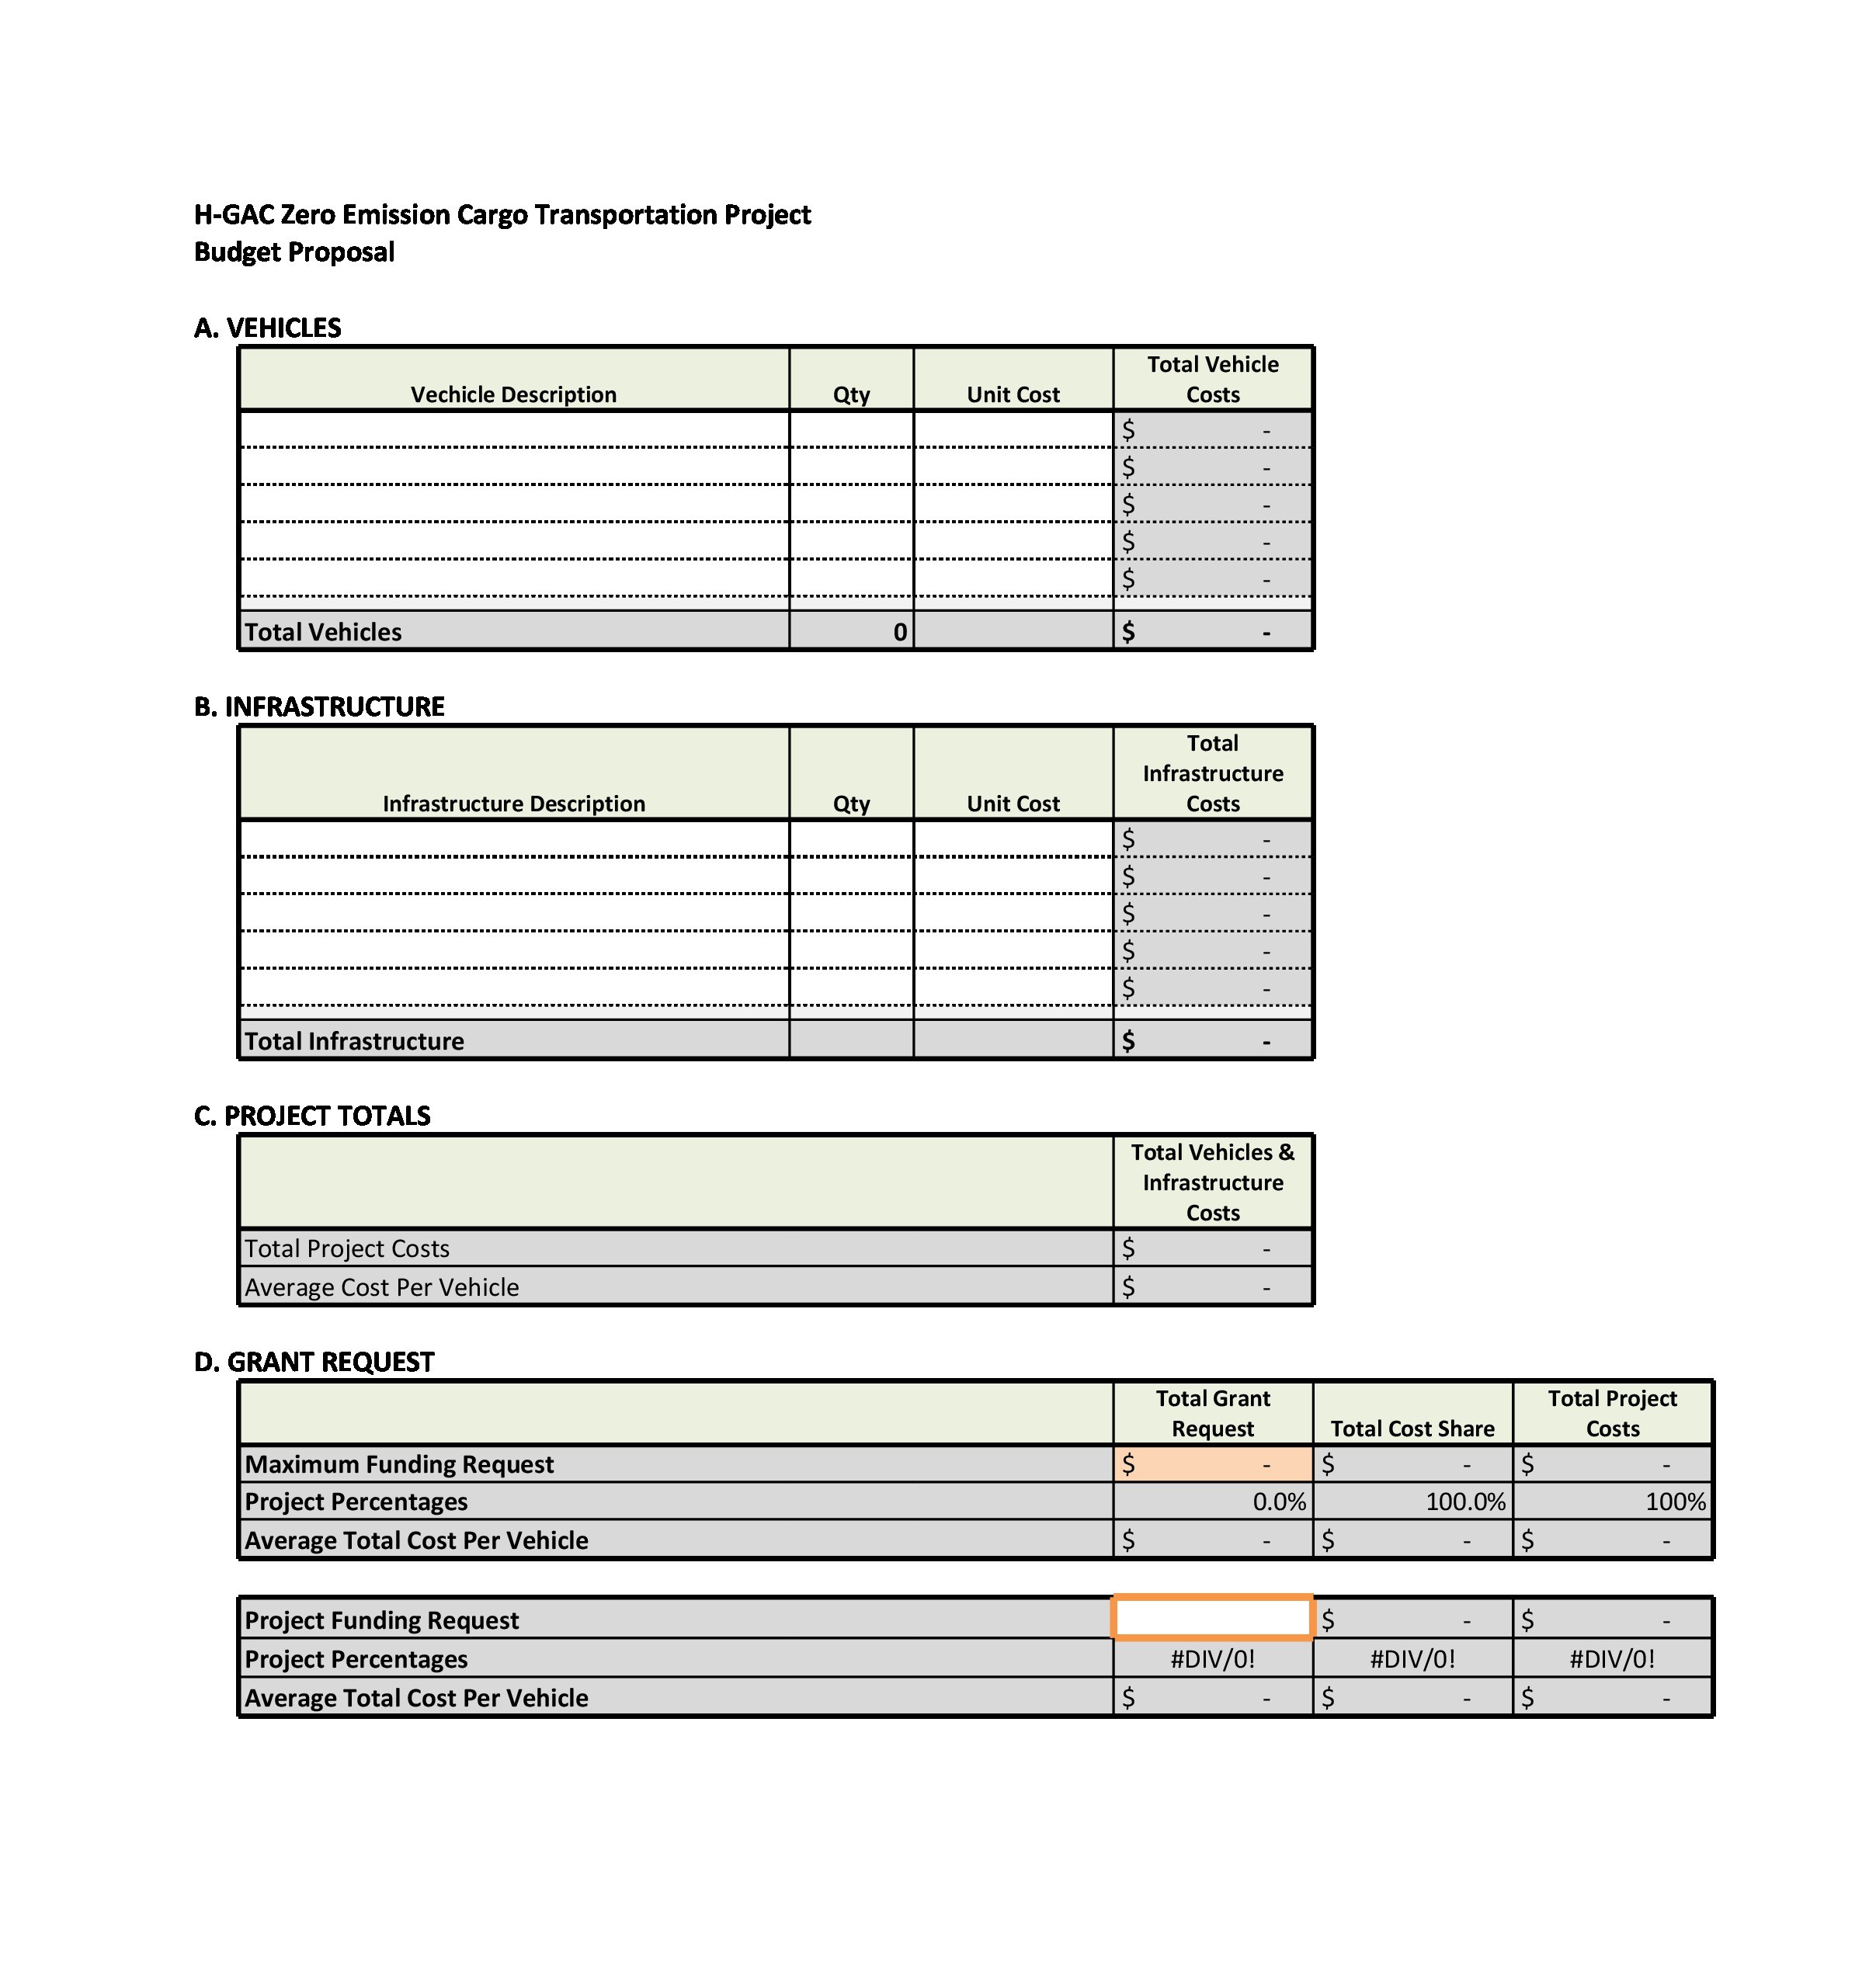 Project Proposal Budget Template